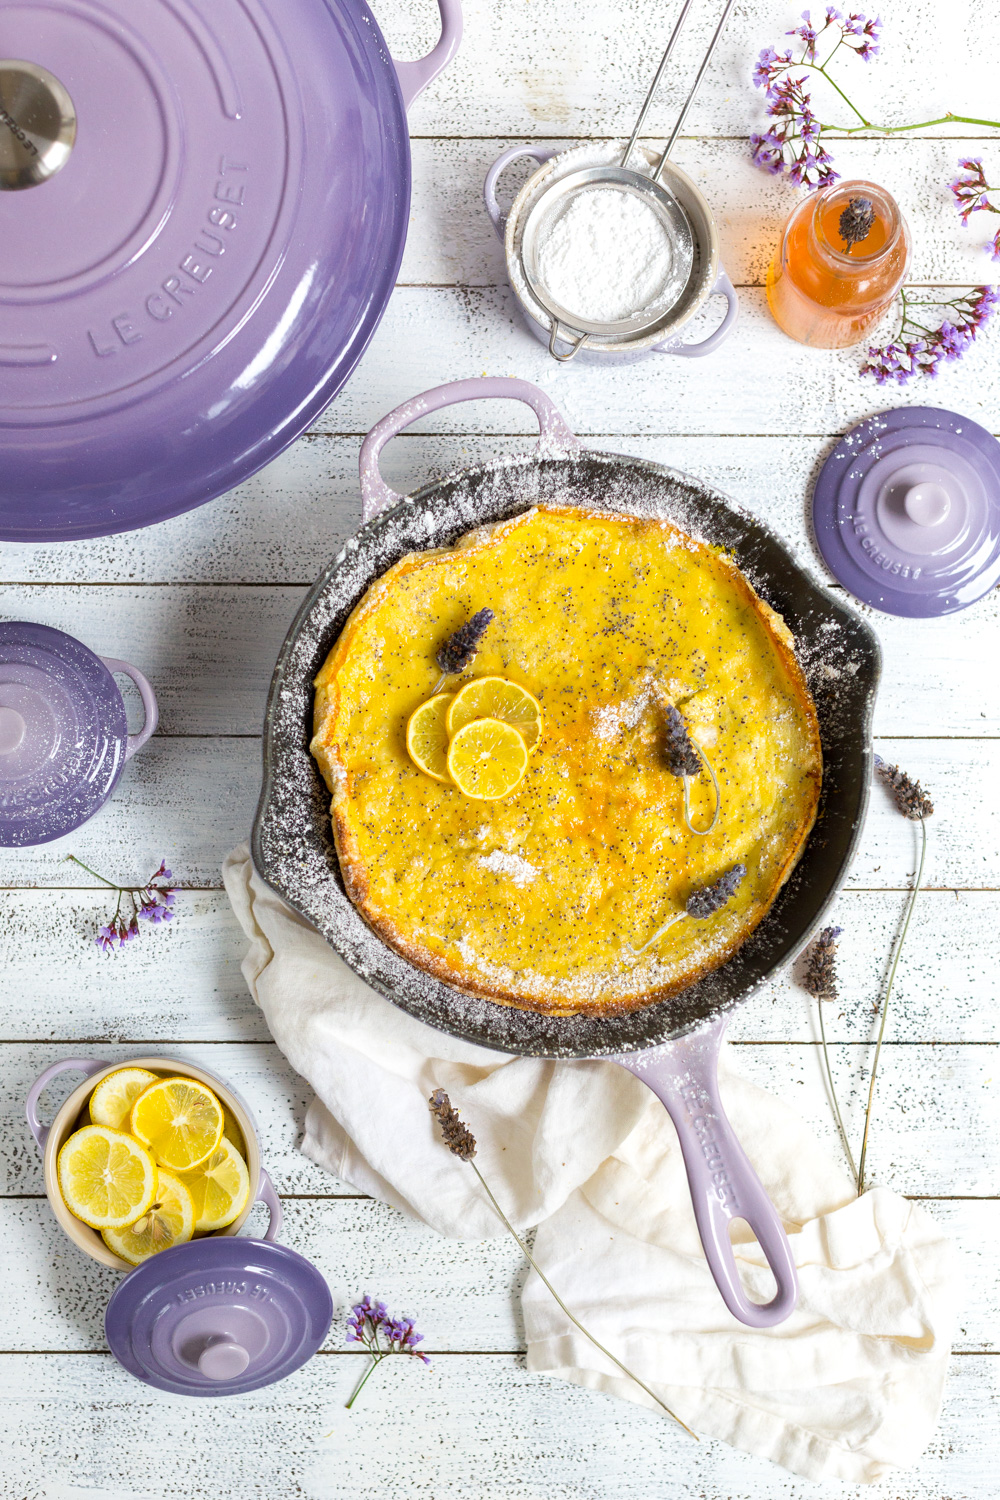 Lemon Poppy Seed German Pancake with Lavender Syrup from Baking The Goods